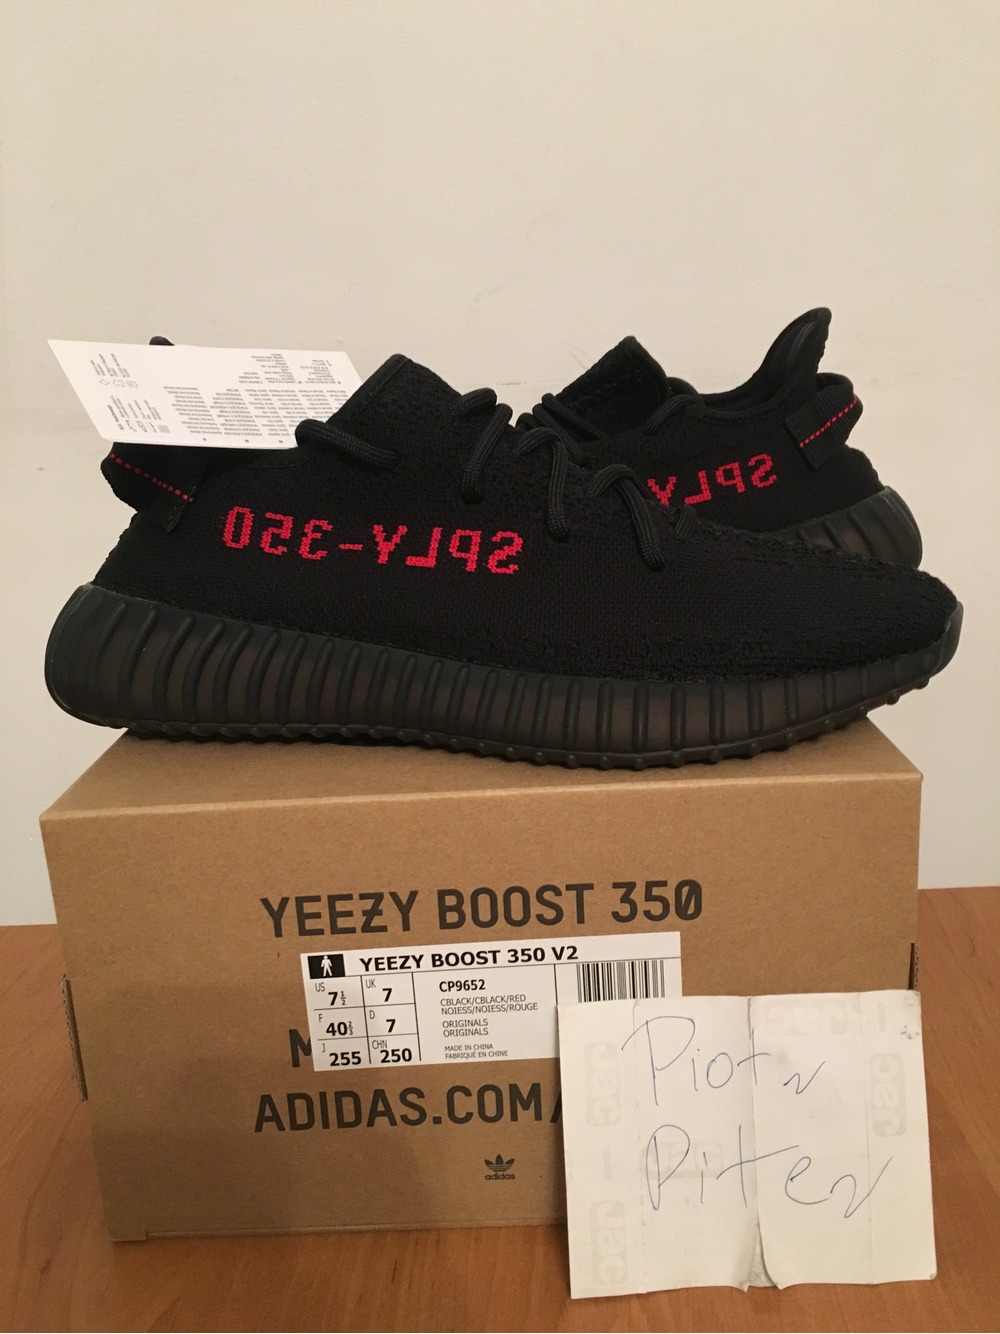 YEEZY BOOST 350 v2 BRED REVIEW VERLOSUNG.